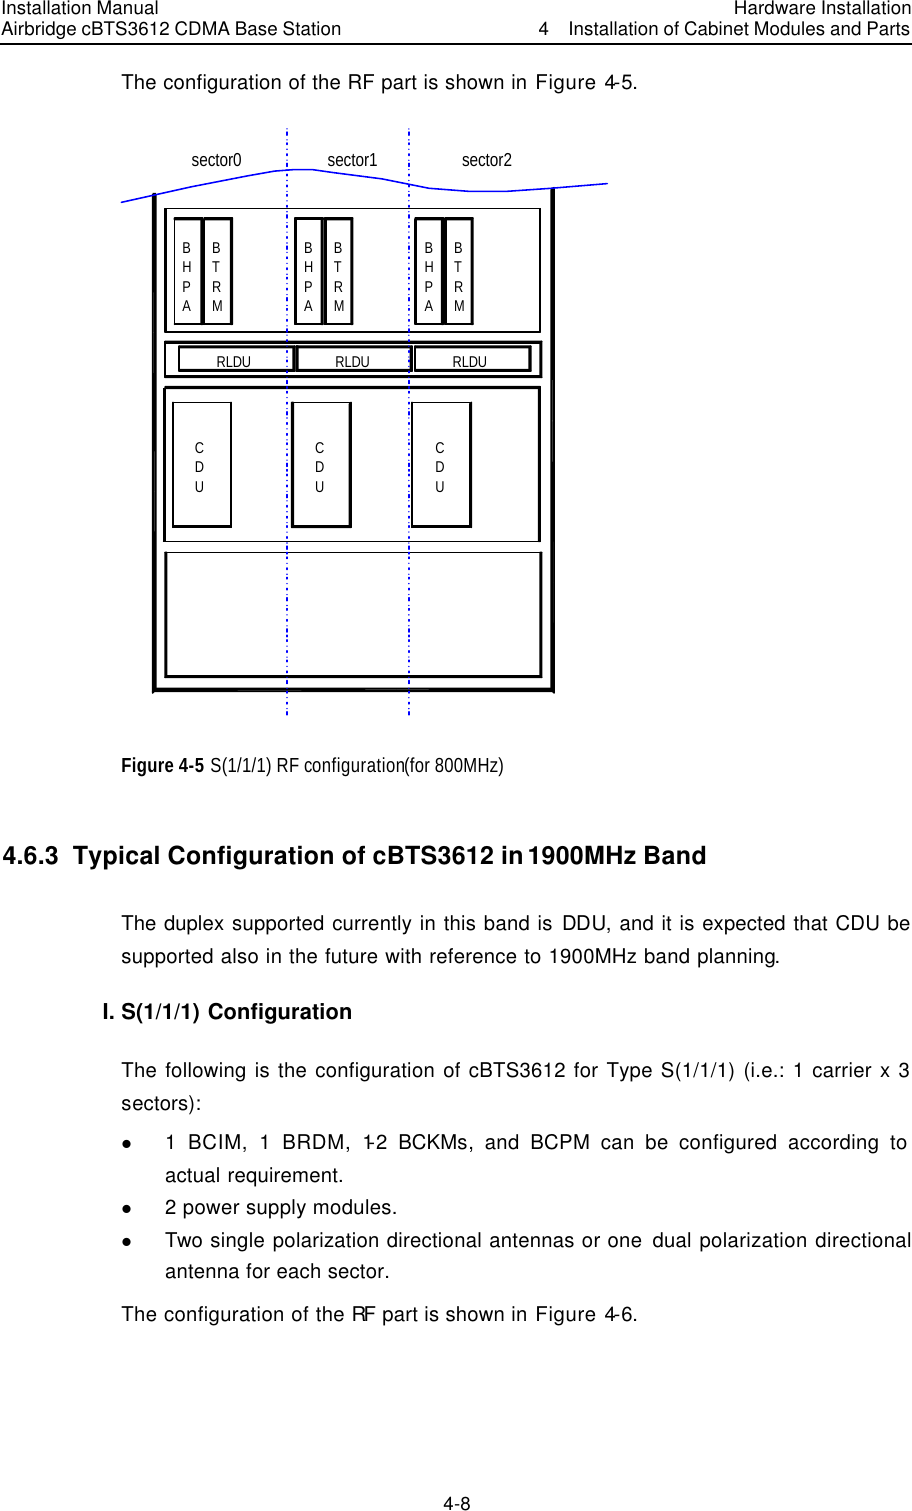 Installation Manual Airbridge cBTS3612 CDMA Base Station Hardware Installation4  Installation of Cabinet Modules and Parts 4-8　The configuration of the RF part is shown in Figure 4-5.   CDUBHPABTRMRLDUCDUCDUBHPABTRMBHPABTRMRLDU RLDUsector0 sector2sector1 Figure 4-5 S(1/1/1) RF configuration(for 800MHz) 4.6.3  Typical Configuration of cBTS3612 in 1900MHz Band The duplex supported currently in this band is DDU, and it is expected that CDU be supported also in the future with reference to 1900MHz band planning. I. S(1/1/1) Configuration The following is the configuration of cBTS3612 for Type S(1/1/1) (i.e.: 1 carrier x 3 sectors):   l 1 BCIM, 1 BRDM, 1-2 BCKMs, and BCPM can be configured according to actual requirement.   l 2 power supply modules.   l Two single polarization directional antennas or one dual polarization directional antenna for each sector. The configuration of the RF part is shown in Figure 4-6.   